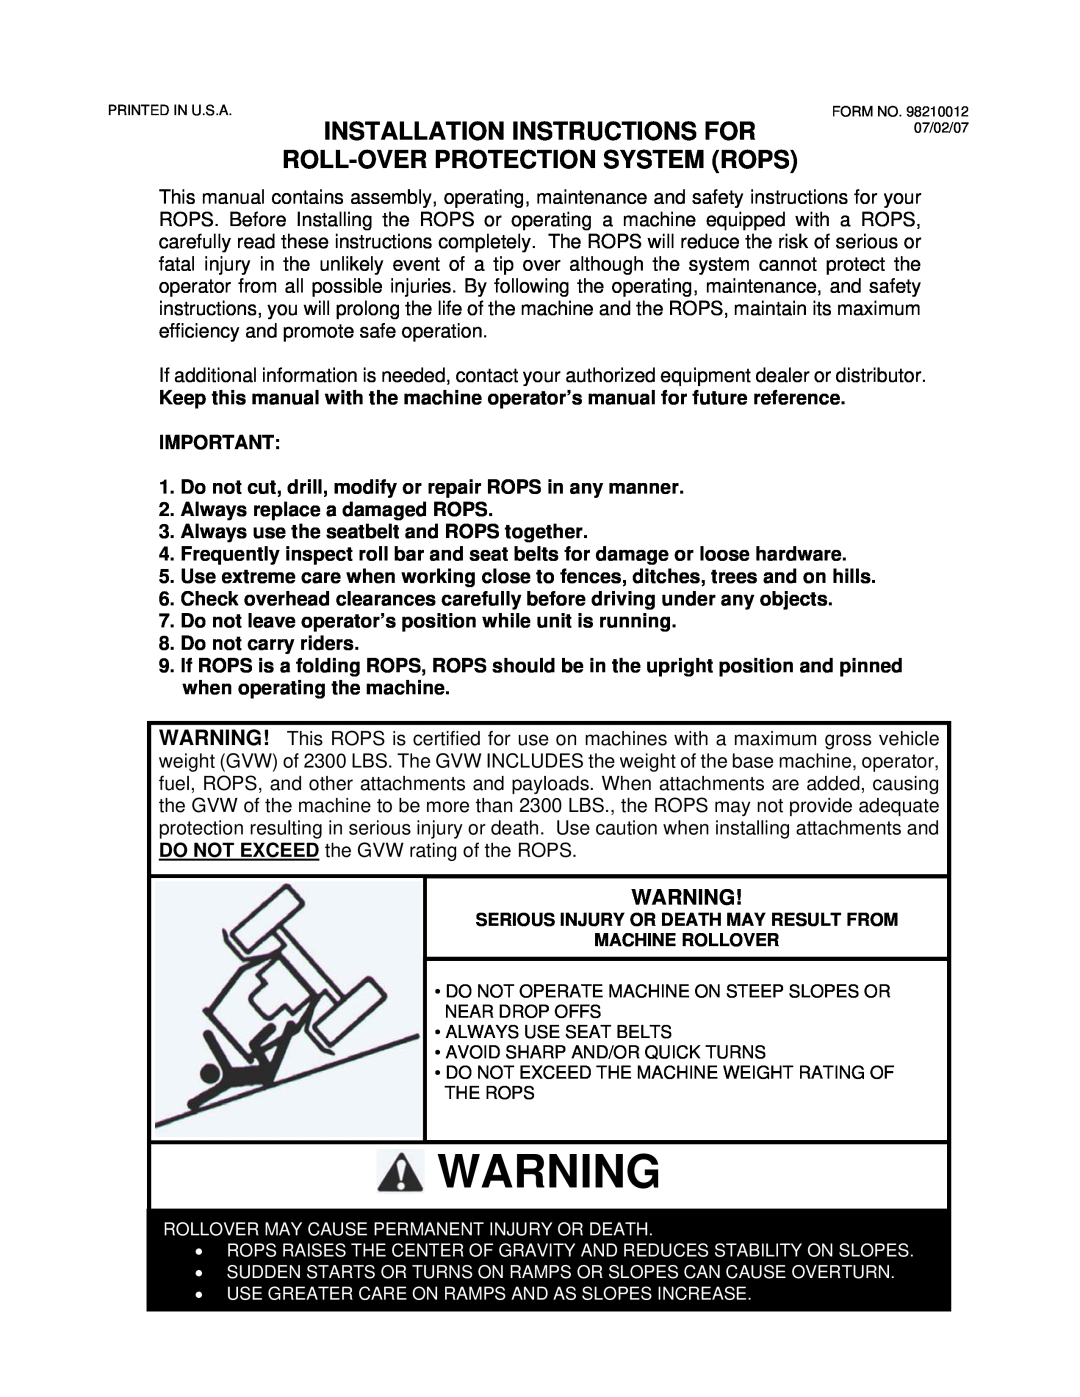 Wright Manufacturing 98210001 operation manual Installation Instructions For, Roll-Overprotection System Rops 